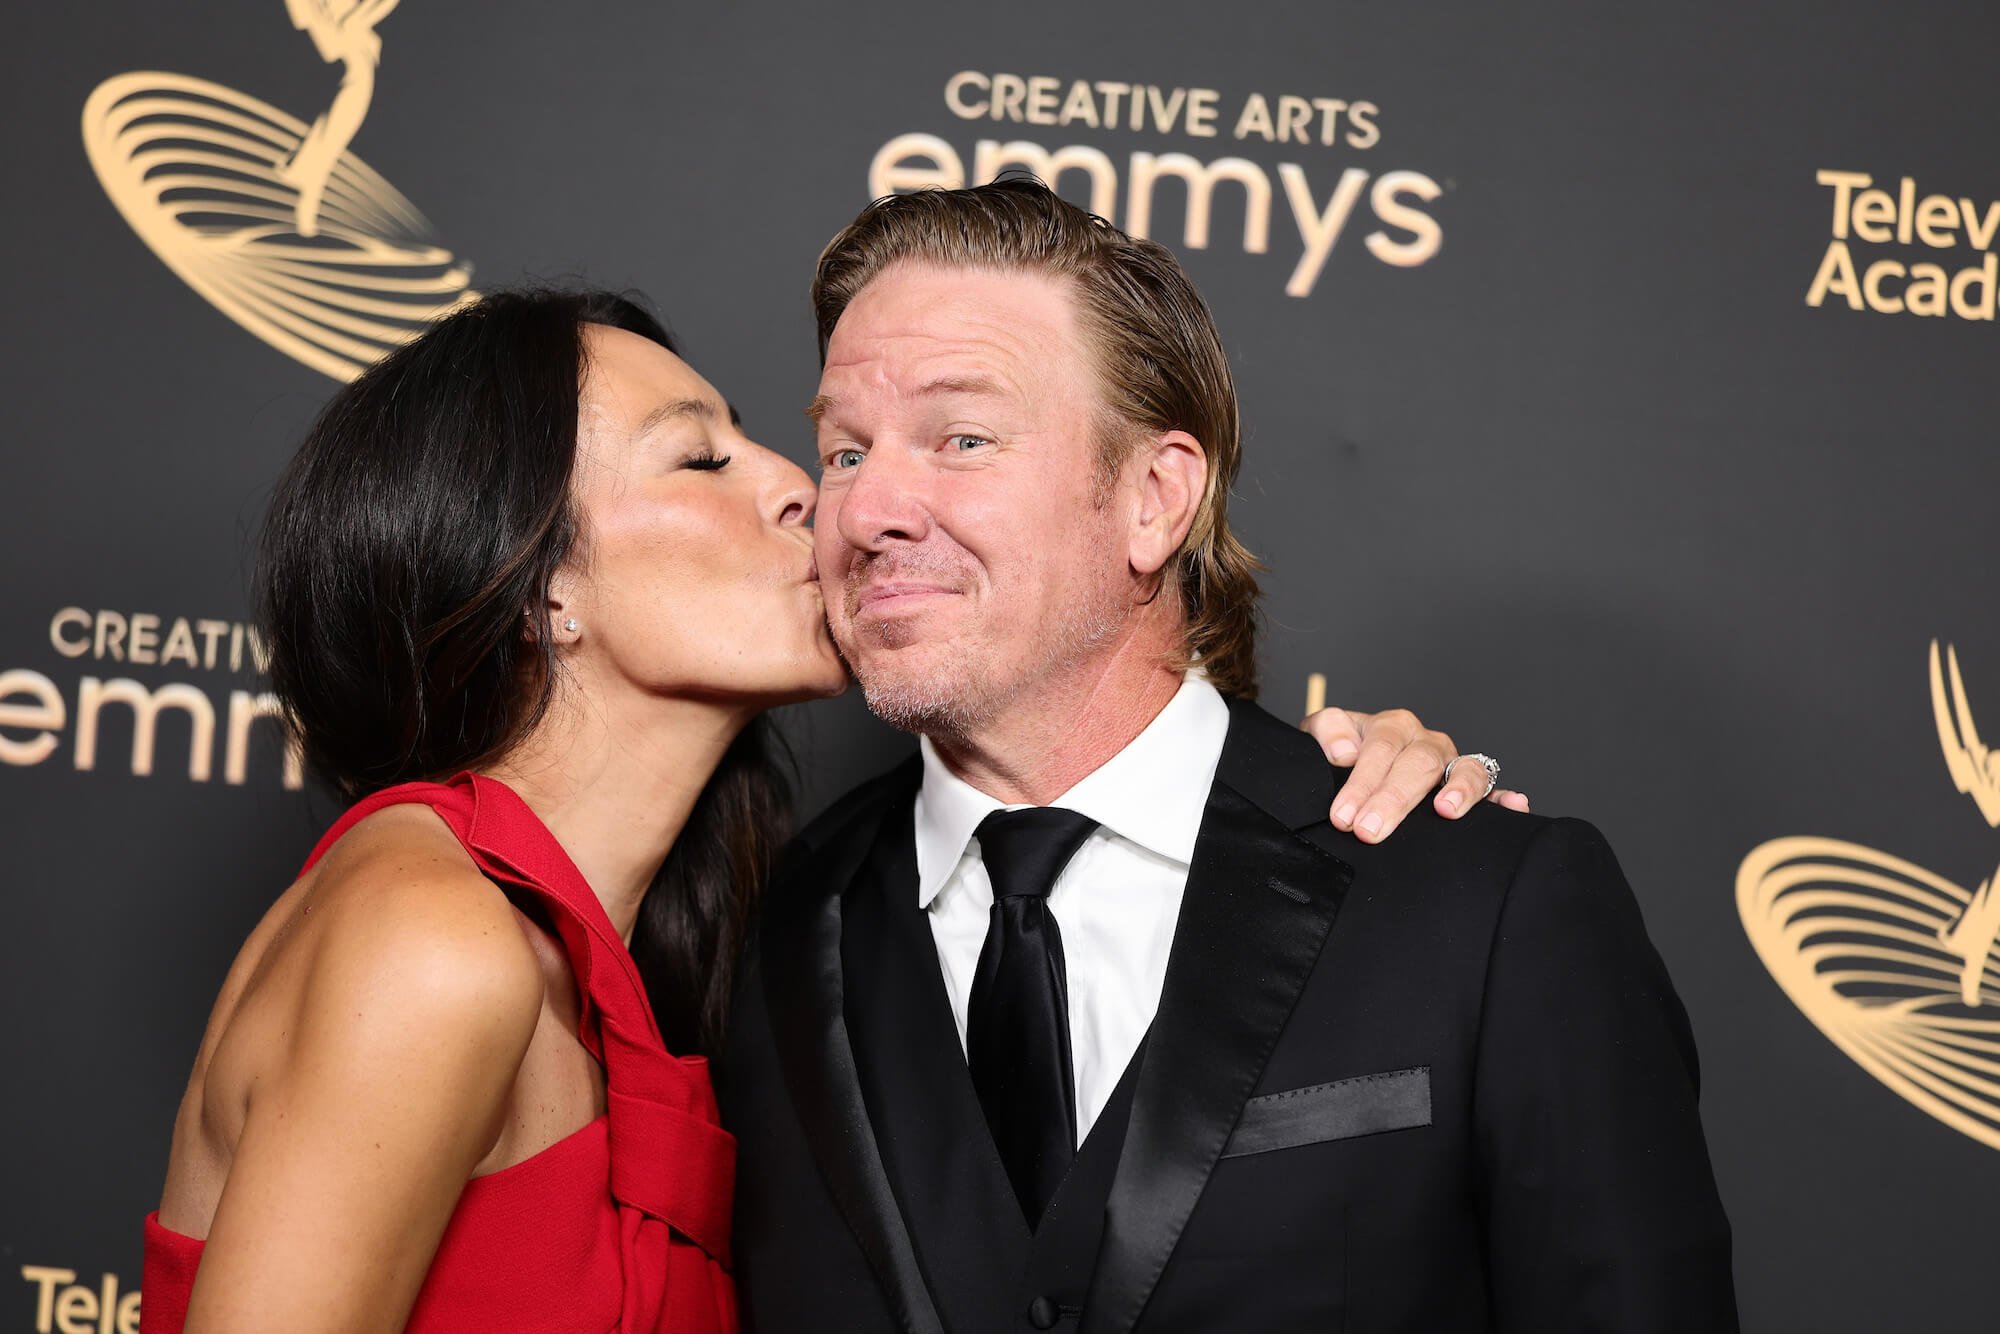 Joanna Gaines from 'Fixer Upper' kissing Chip Gaines on the cheek while standing on the red carpet at the Emmys